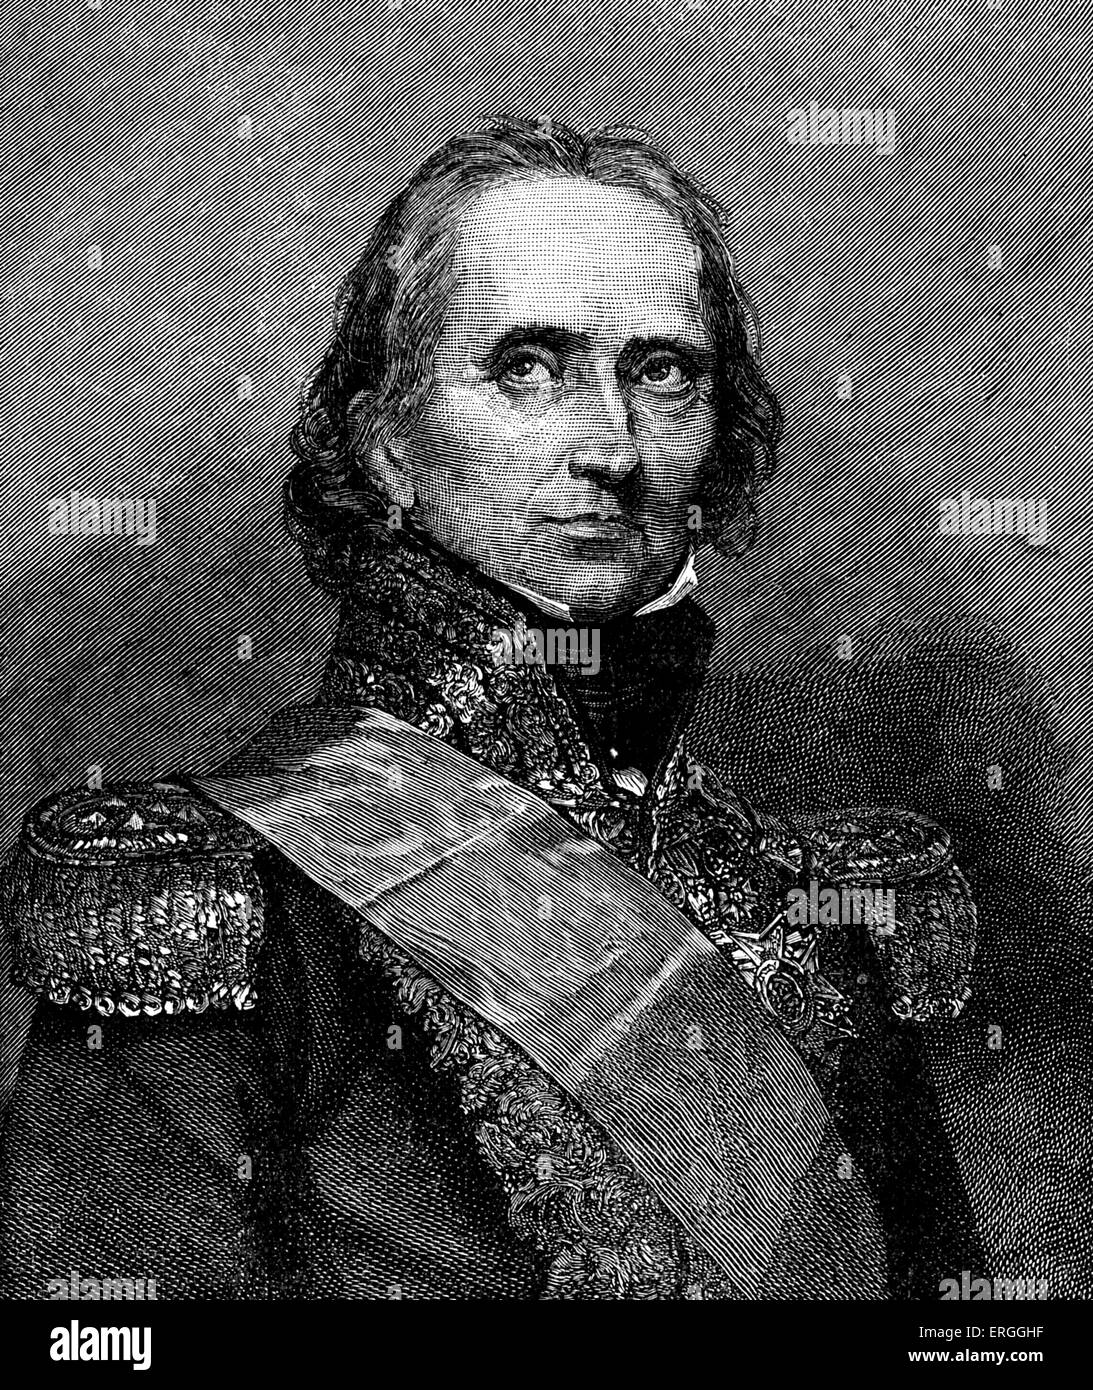 Nicolas Jean-de-Dieu Soult - illustration after portrait by Rouillard. French general and statesman, named Marshal of the Empire in 1804. 29 March 1769 – 26 November 1851. One of 18 original Marshals of France (Maréchaux de France) appointed by Napoleon Bonaparte. Stock Photo